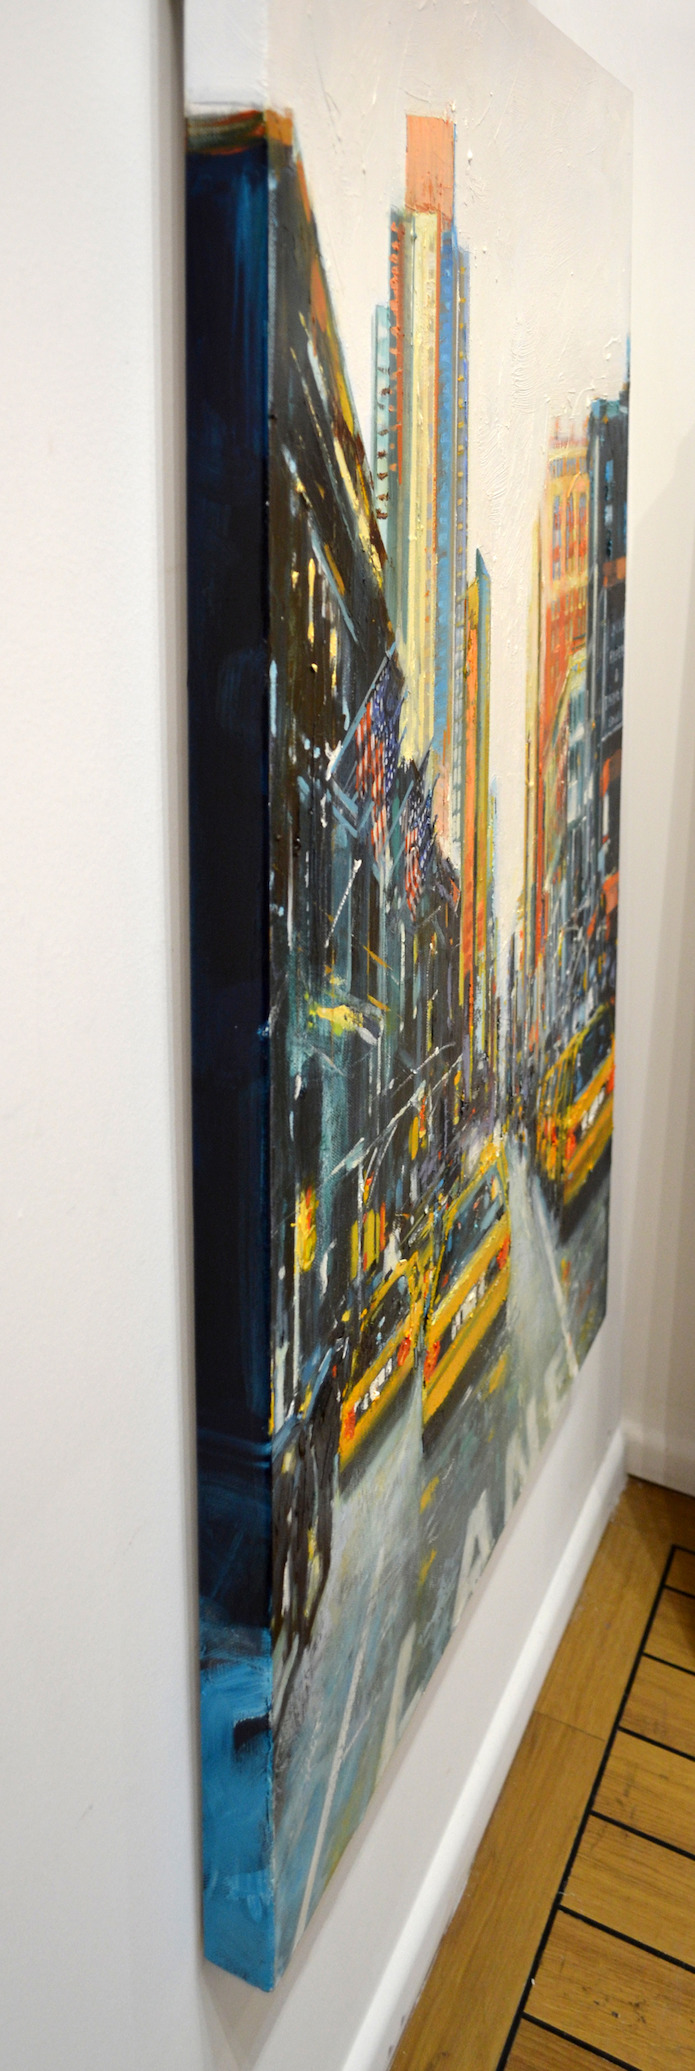 Side View Of Cityscape Painting "Greenwich Village 6th Ave" By Judith Dalozzo